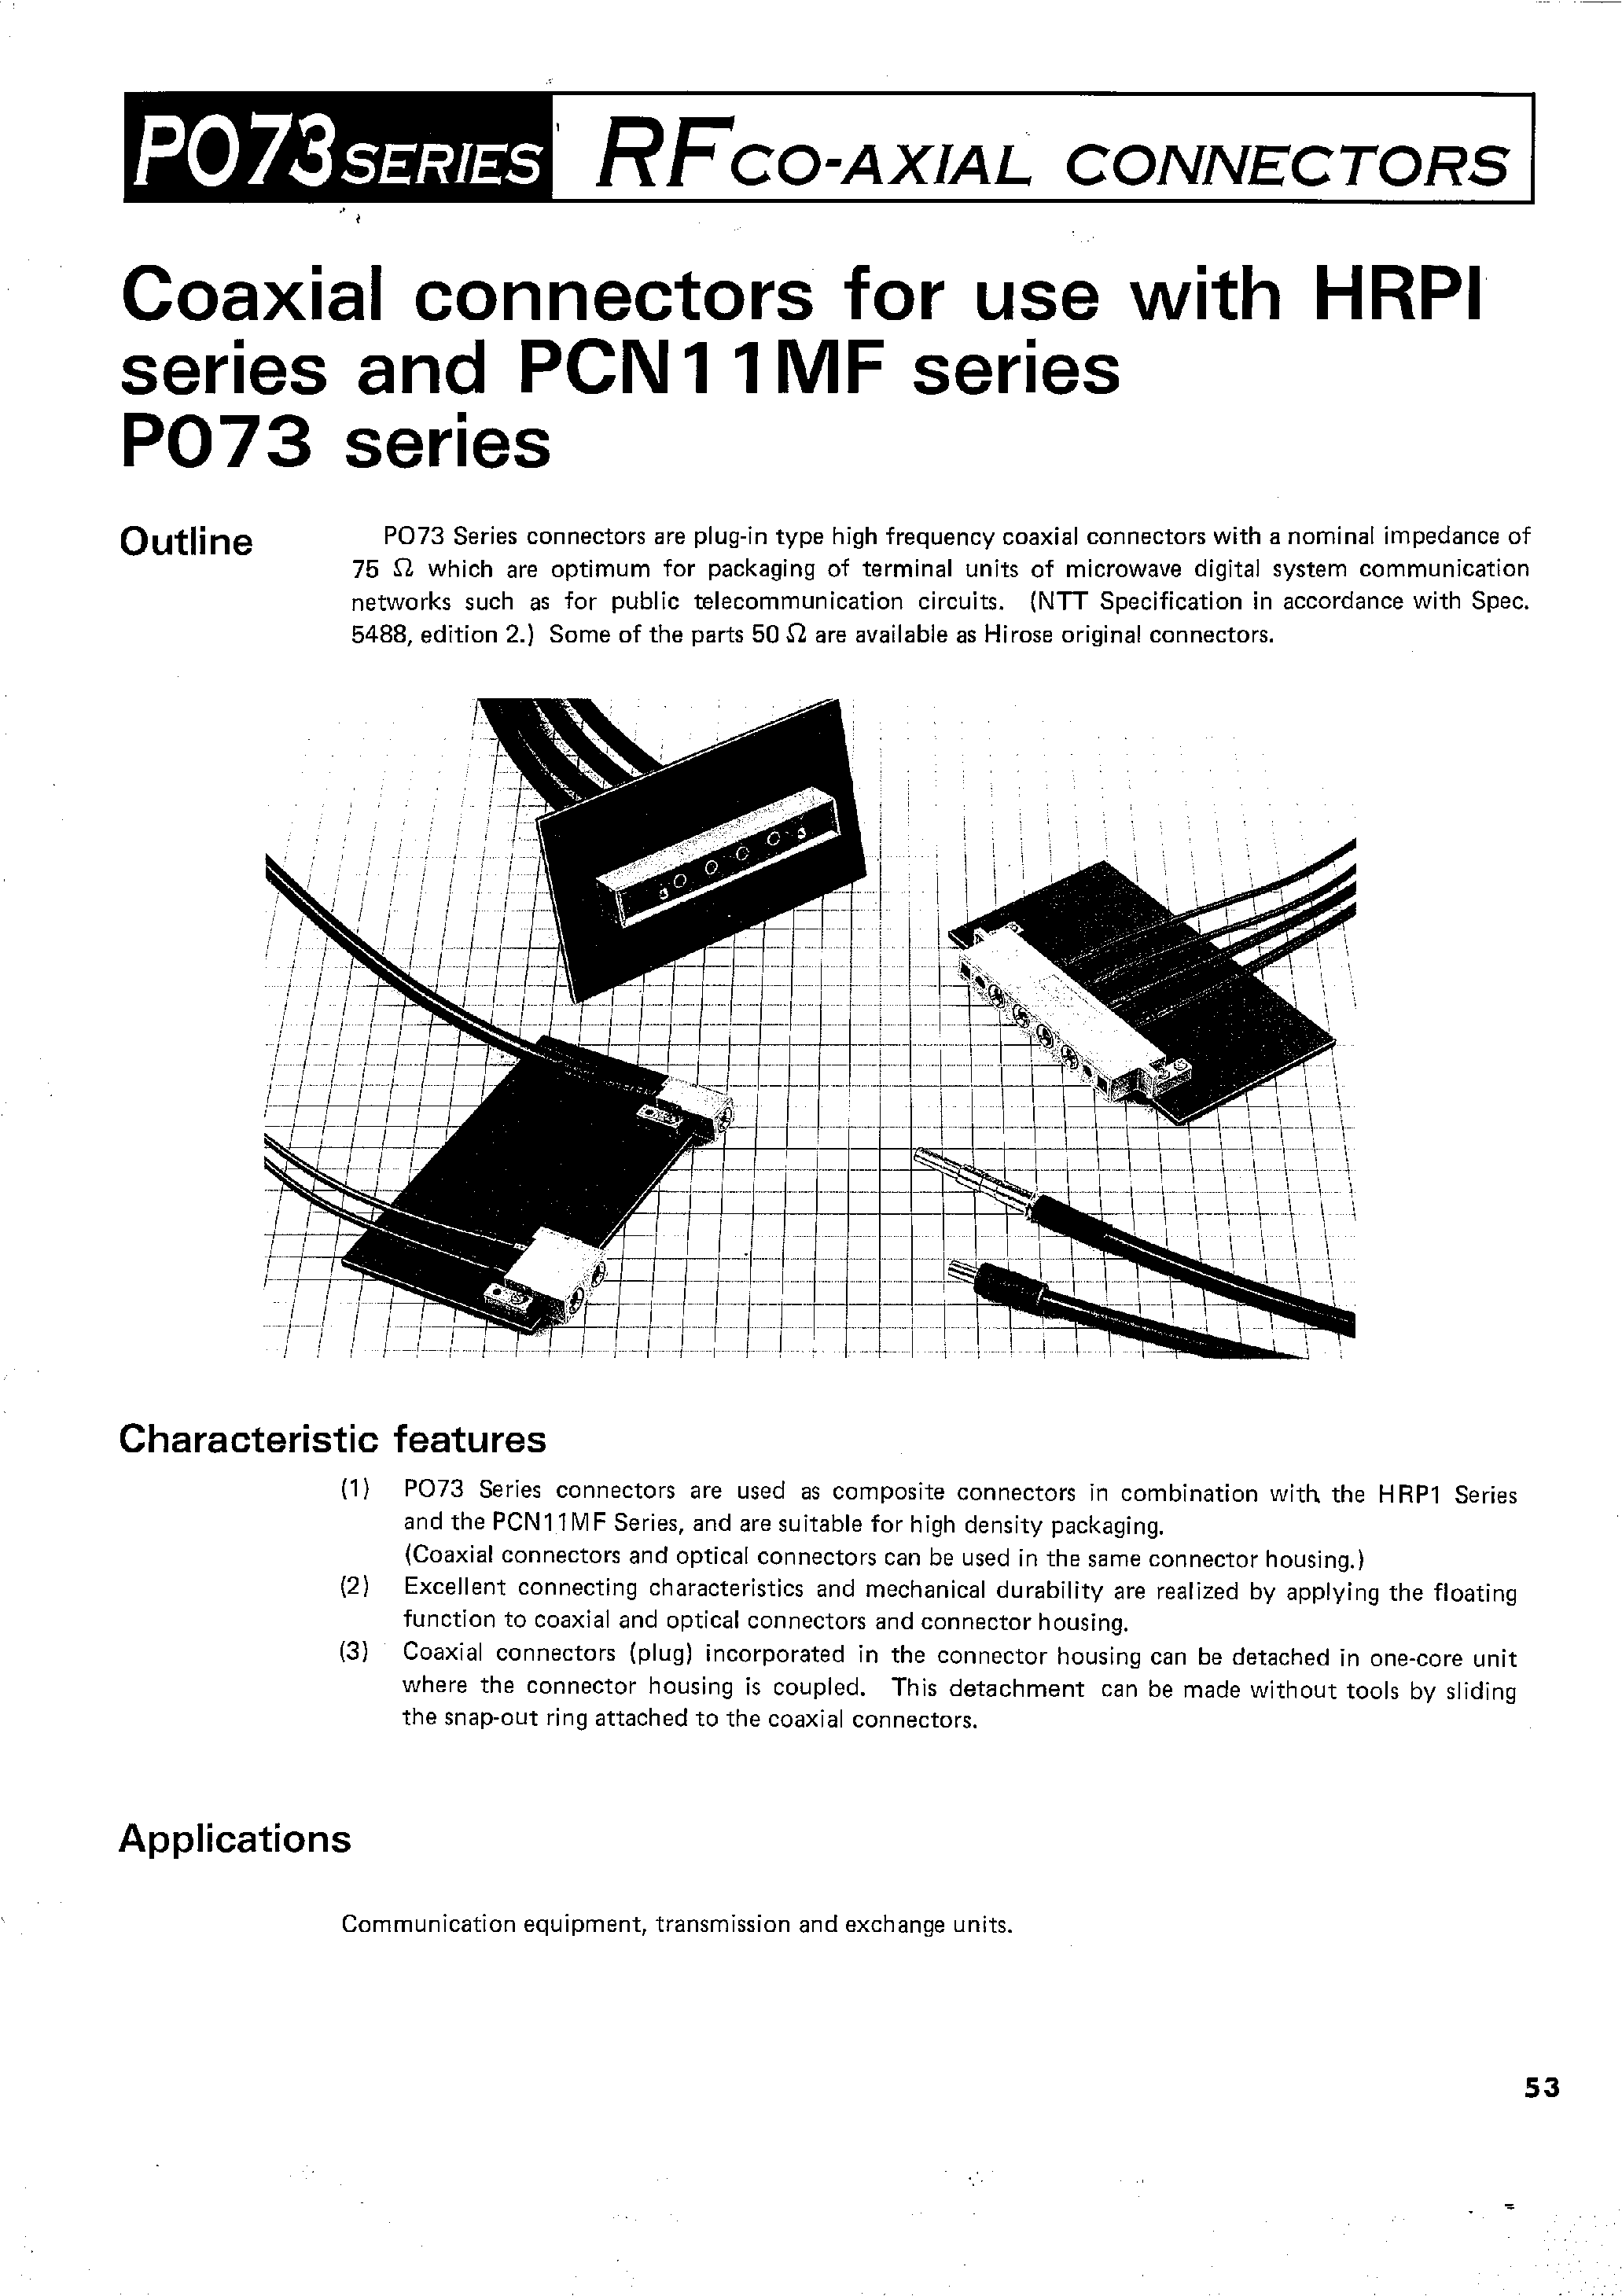 Даташит PO73-P-3CW - RFCO-AXIAL CONNECTORS(COAXIAL CONNECTORS for use with HRPI) страница 1